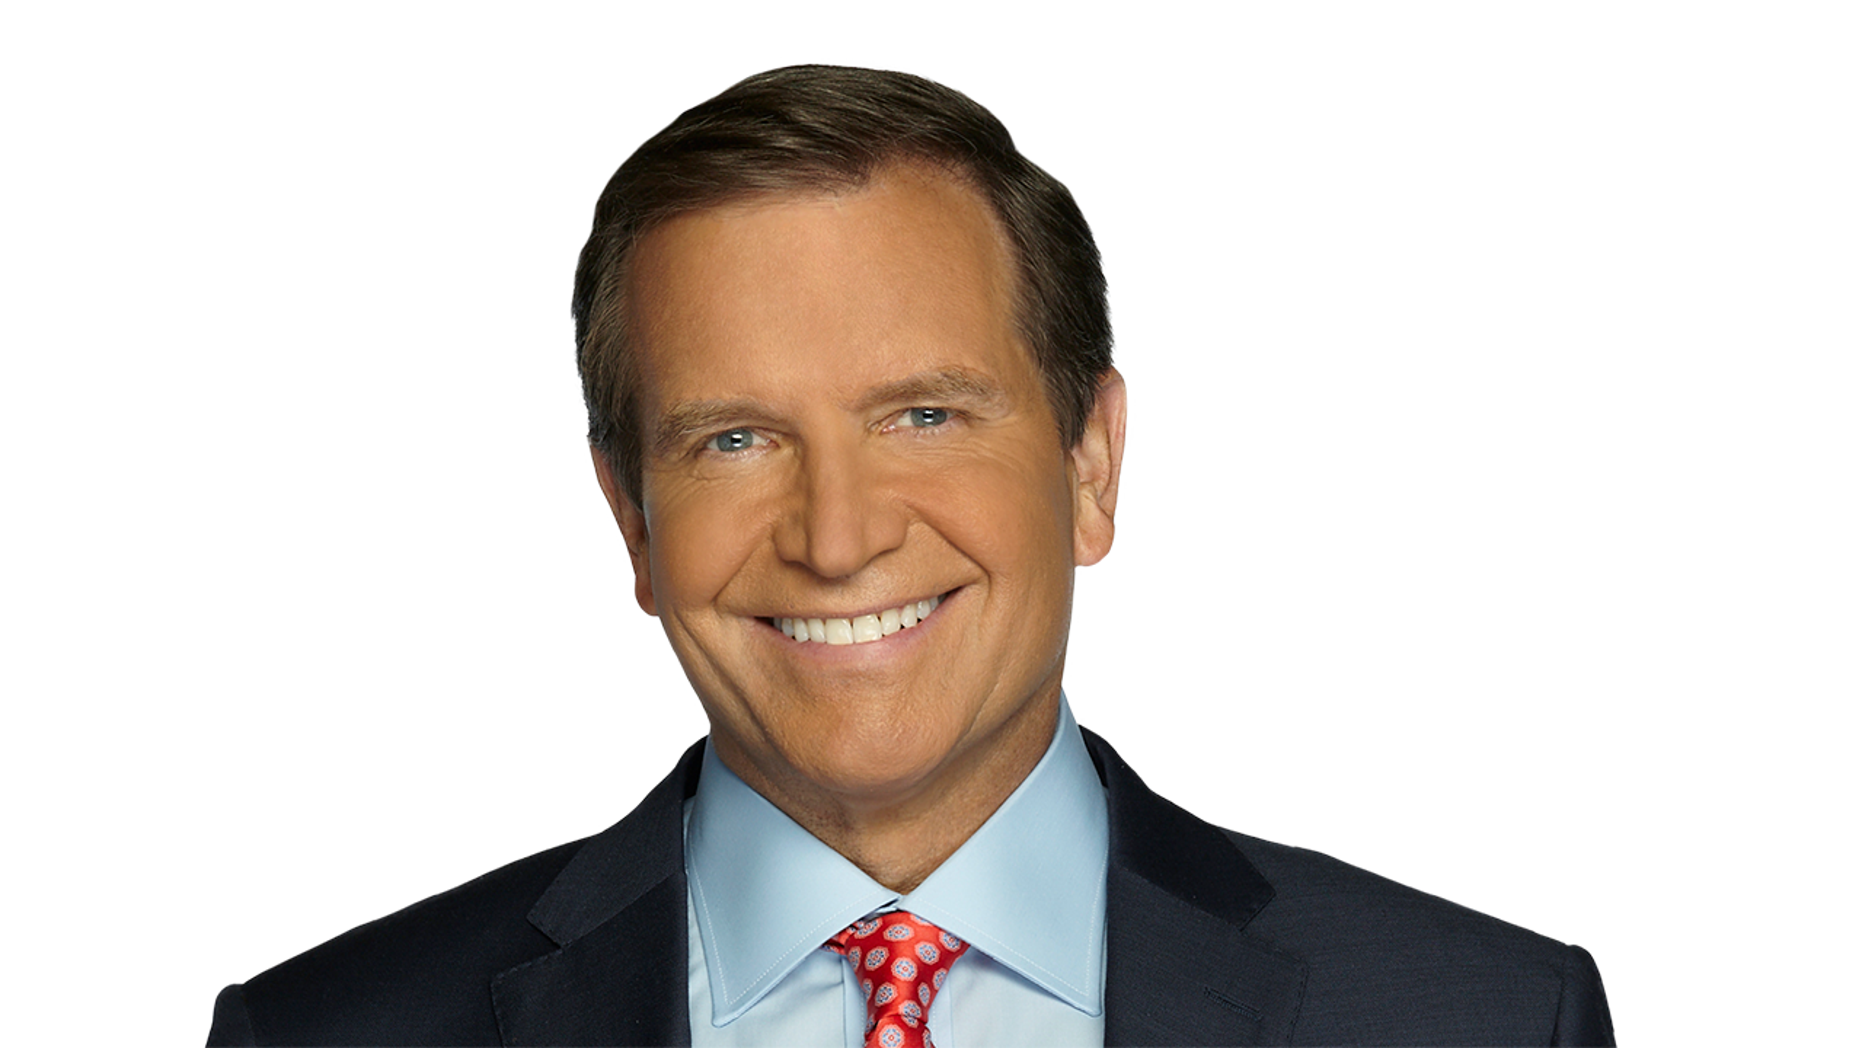 Fox News’ Jon Scott will be honored at famed Times Square New Year’s Eve celebration